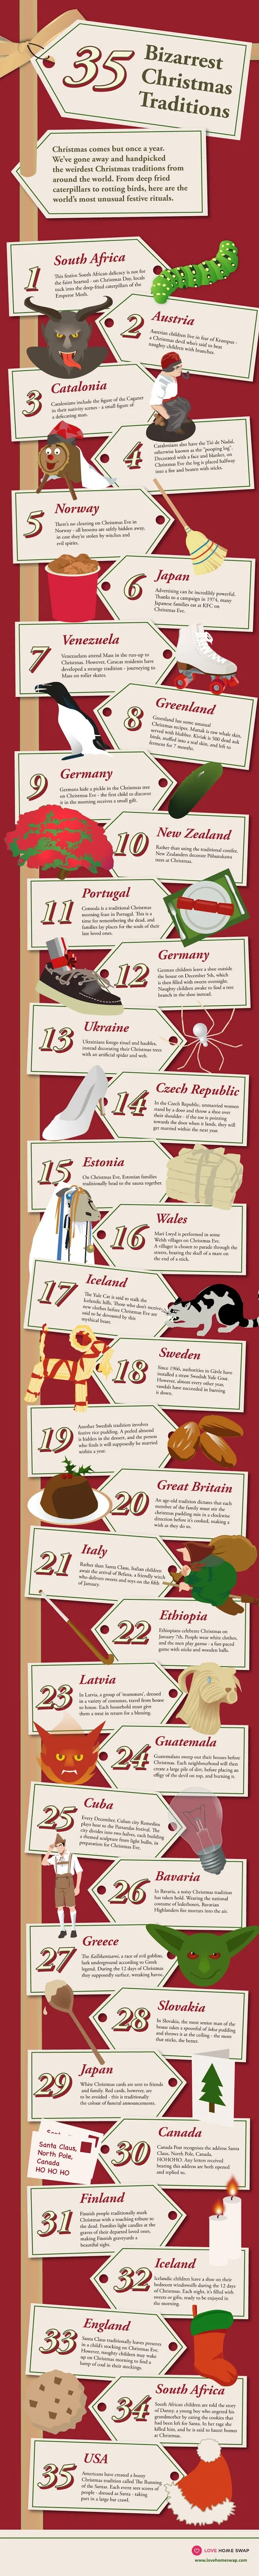 30+ Weird Christmas Traditions Around The World [infographic]